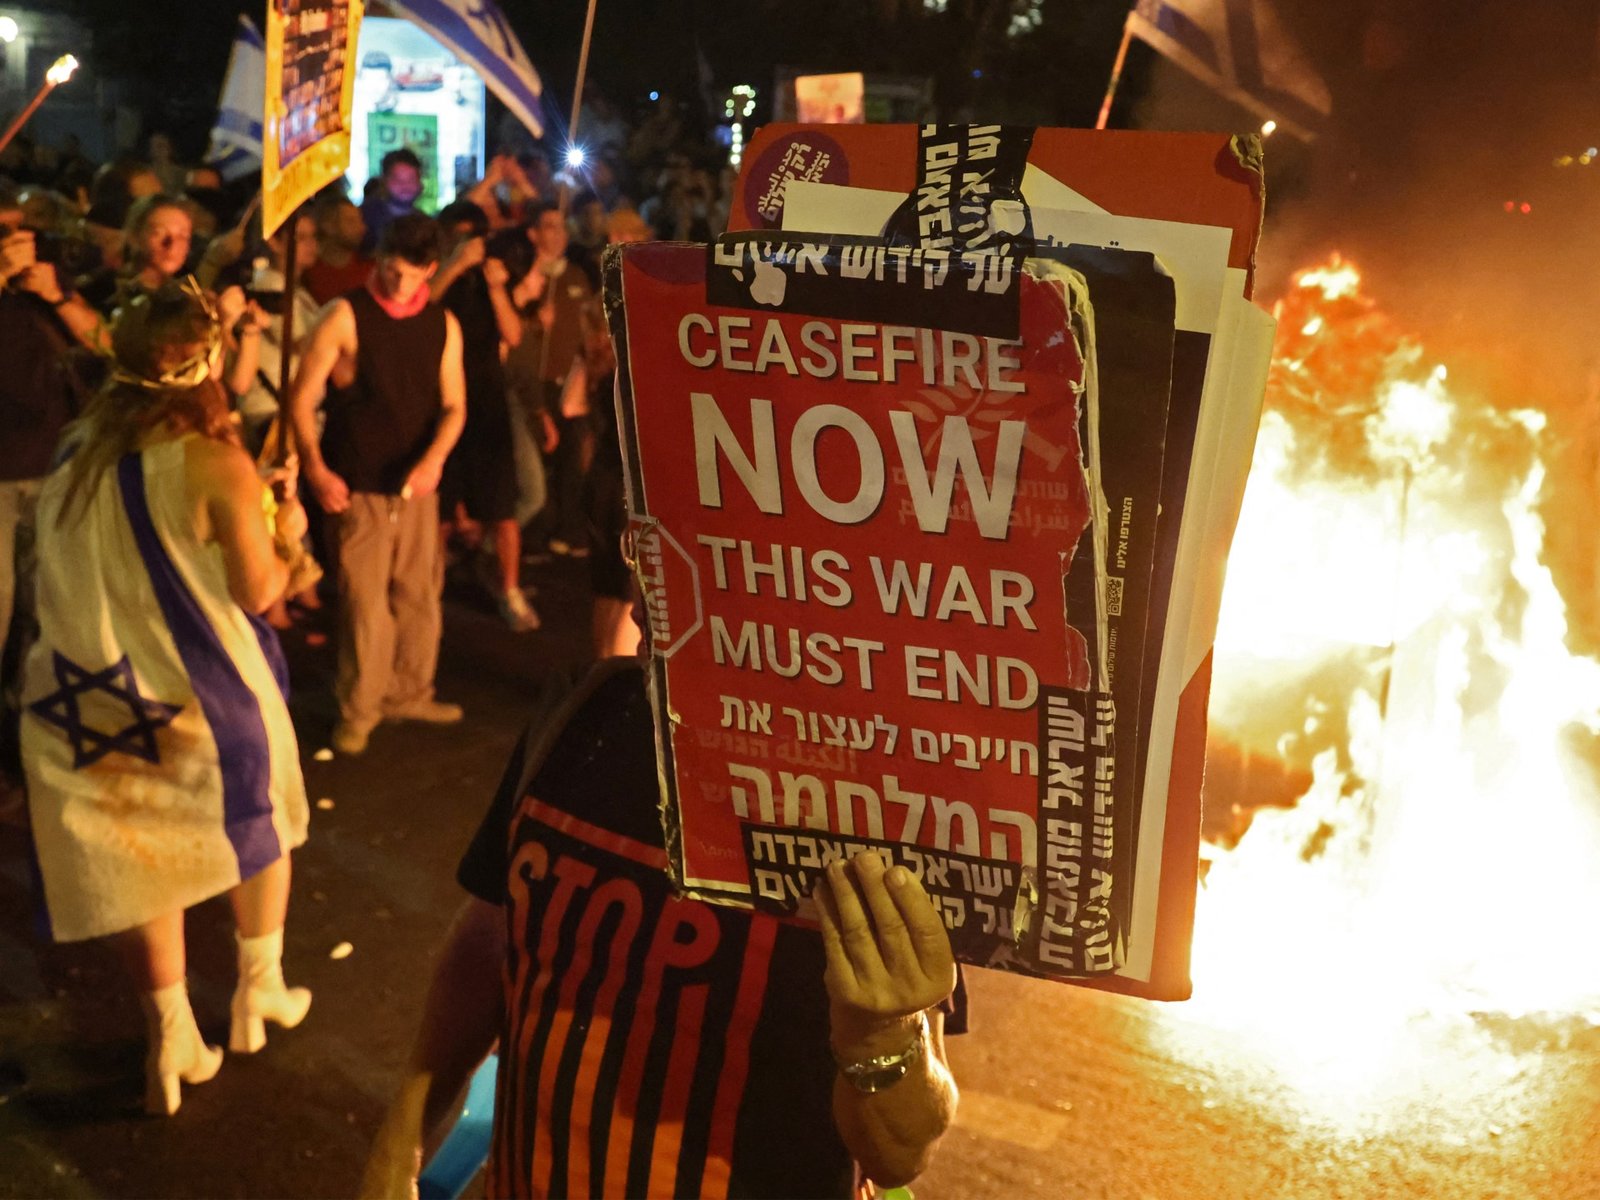 ‘All of the rats in the Knesset’: Mass antiwar protest in Israel | Israel-Palestine conflict News